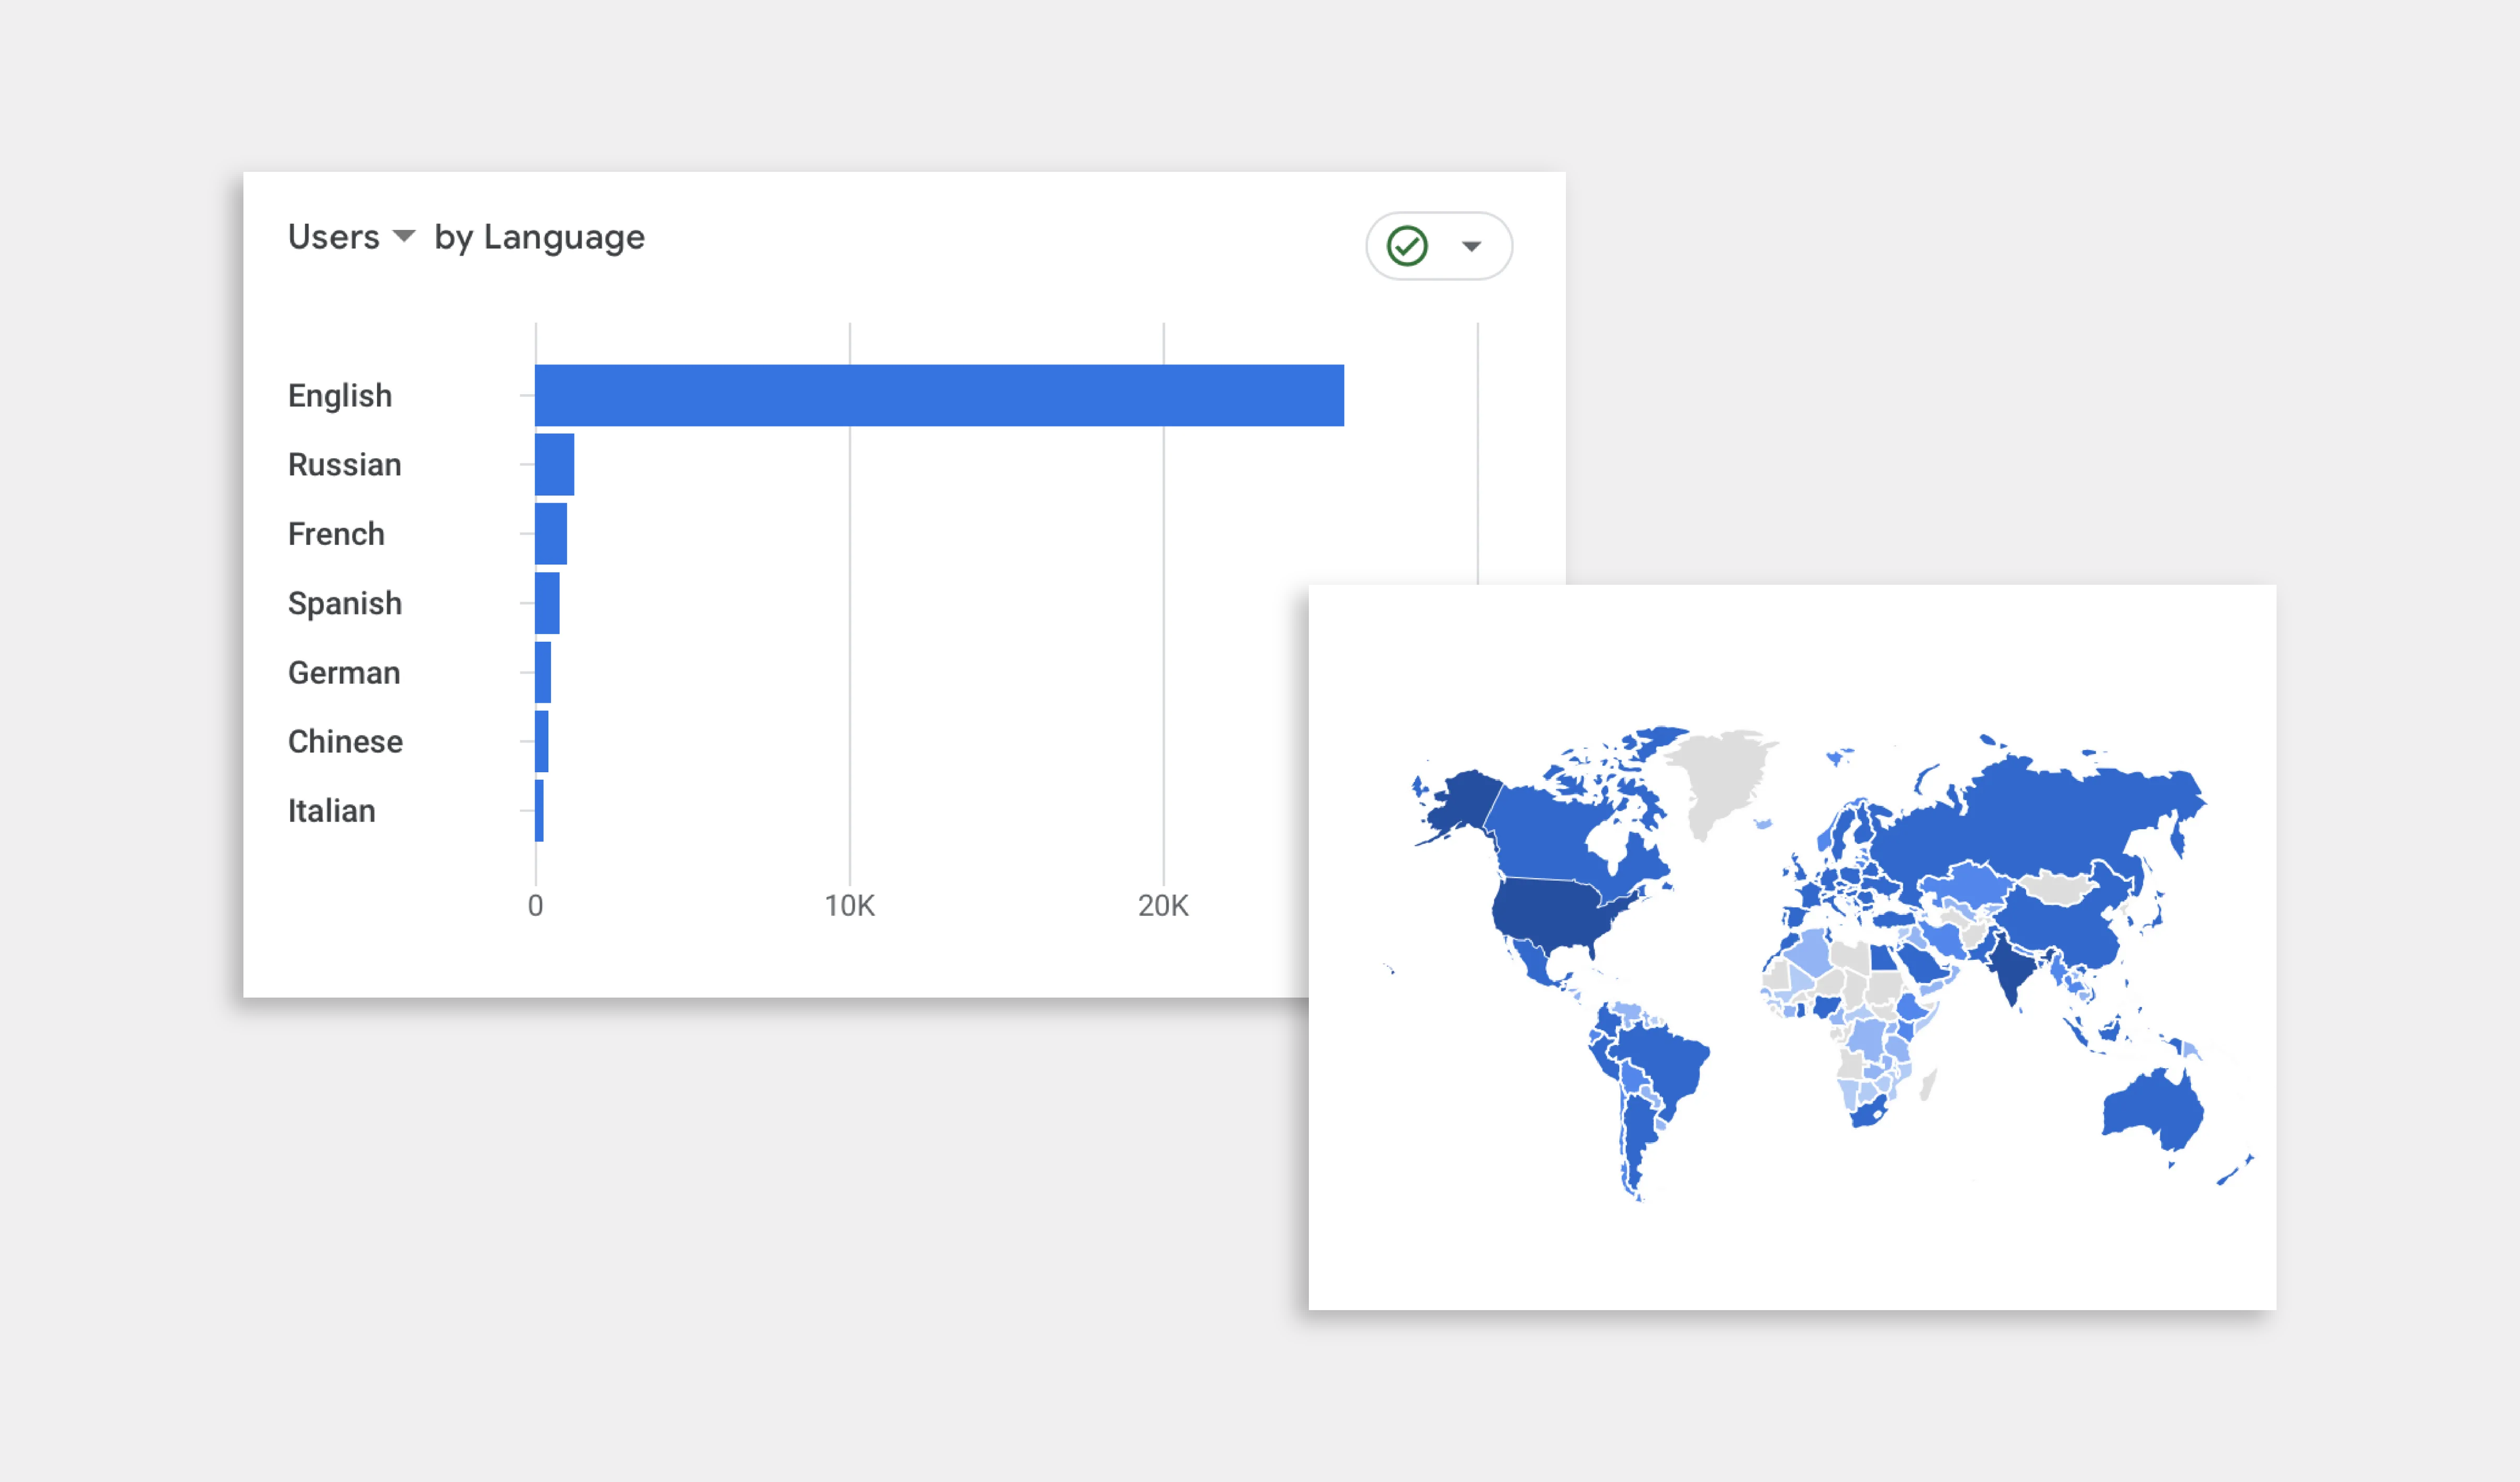 Google Analytics graph showing users by language and country